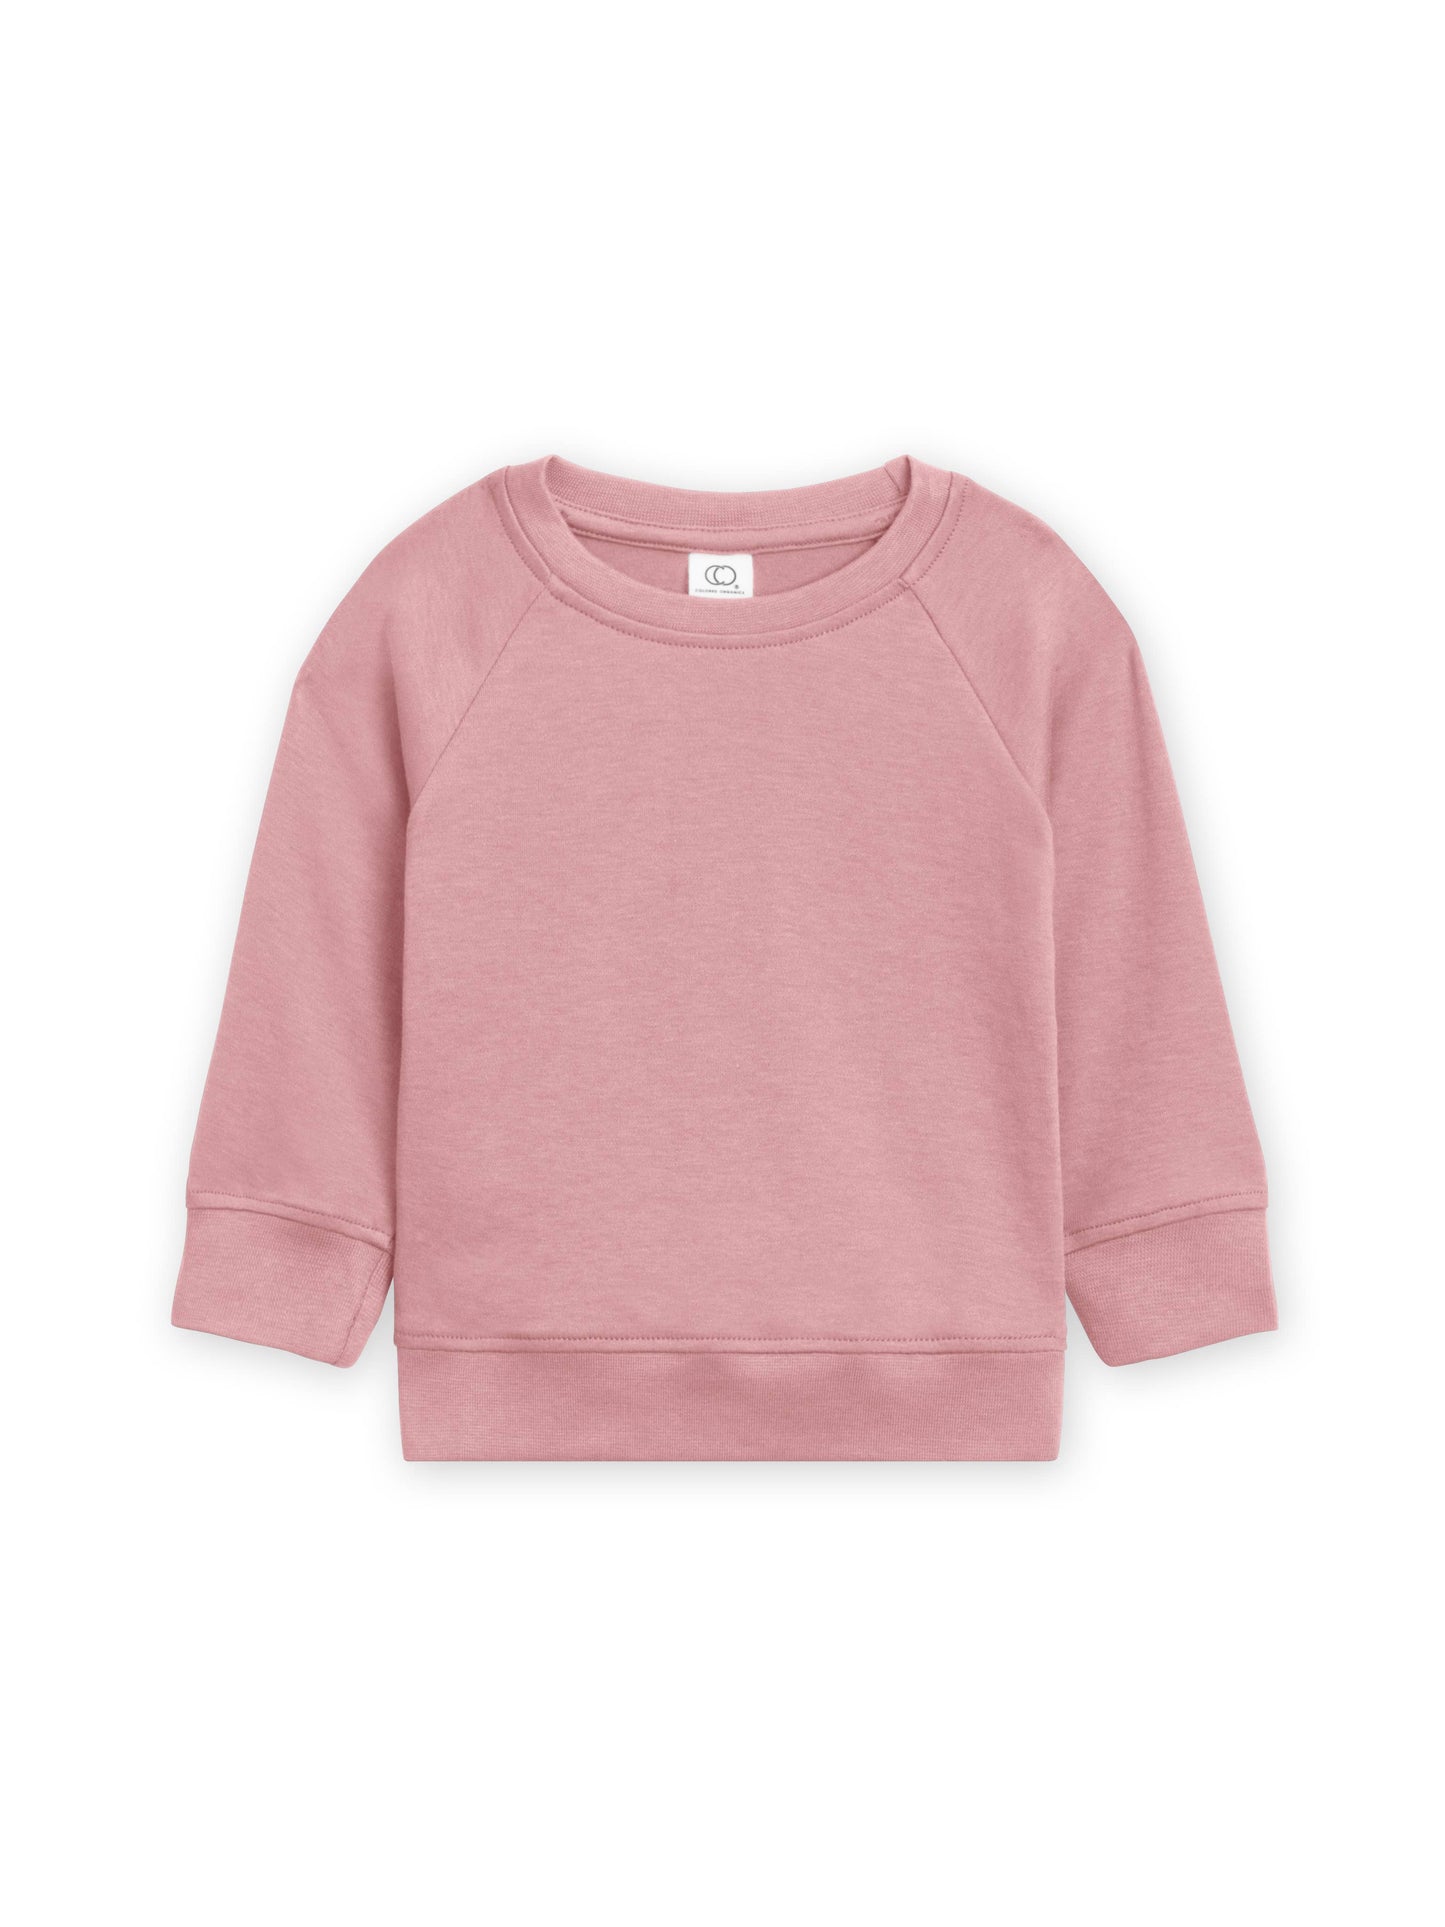 Colored Organics - Organic Baby and Kids Portland Pullover - Rose